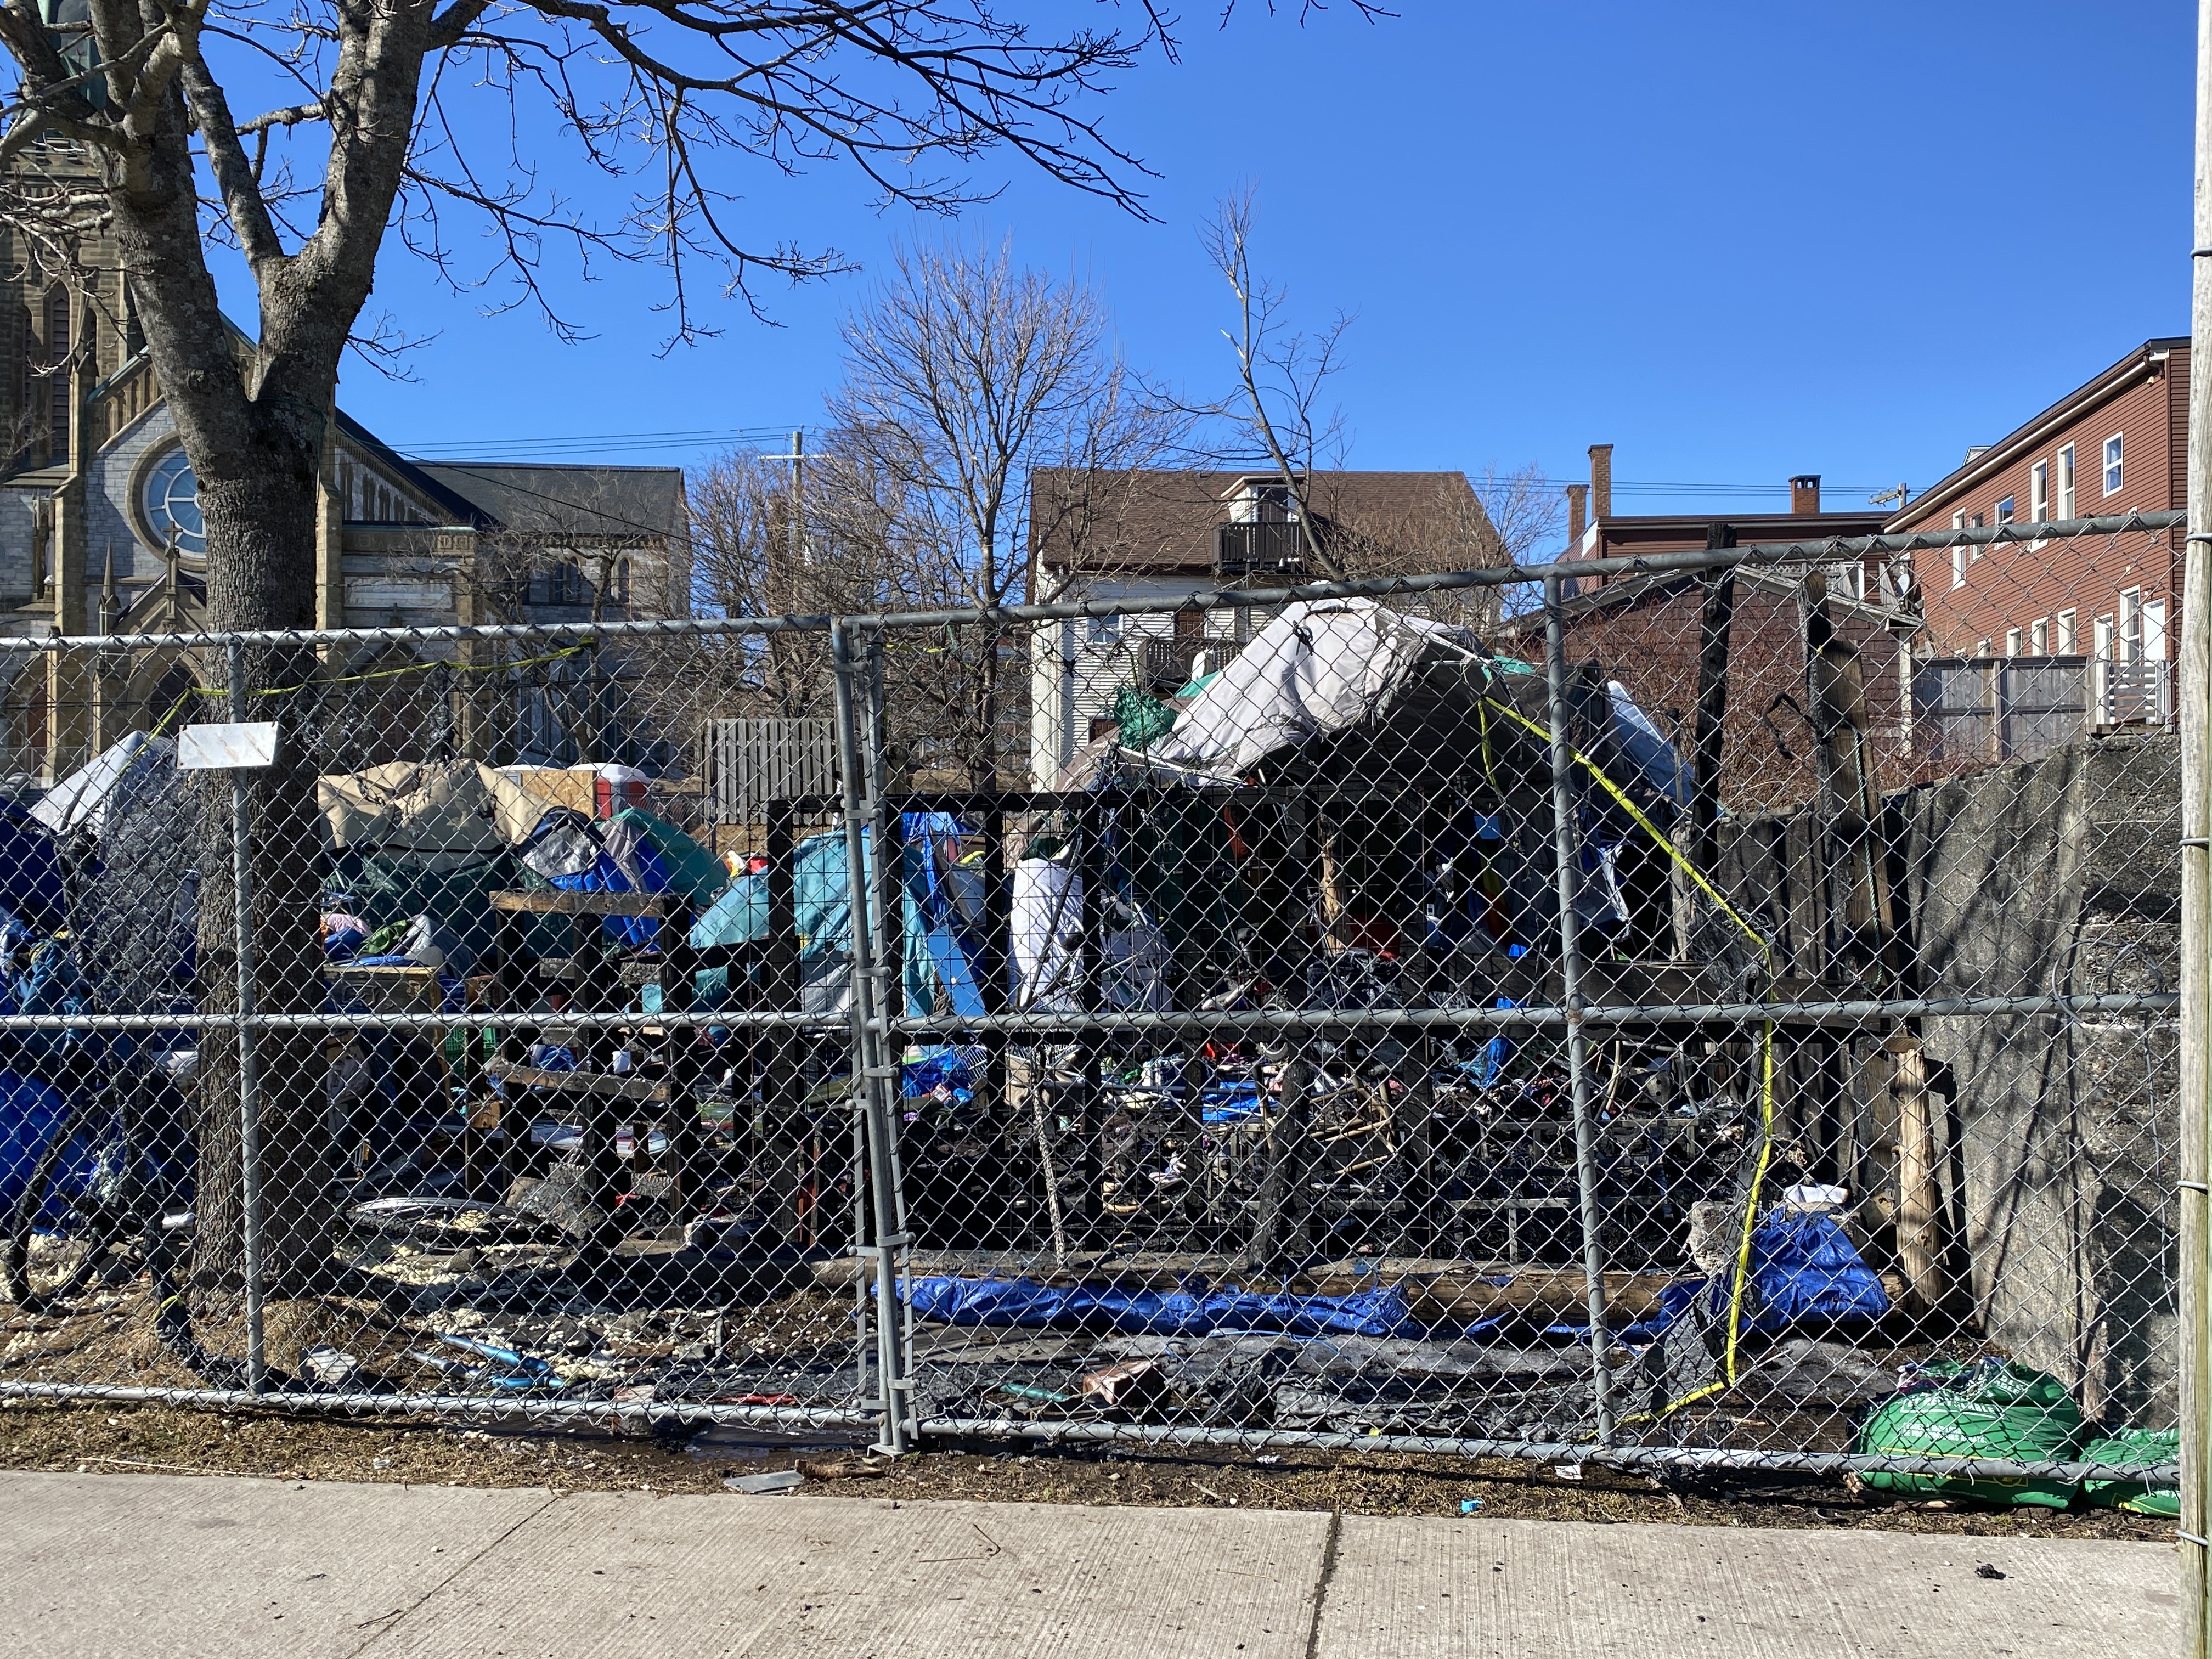 Tent fire breaks out at Saint John homeless encampment, no injuries reported